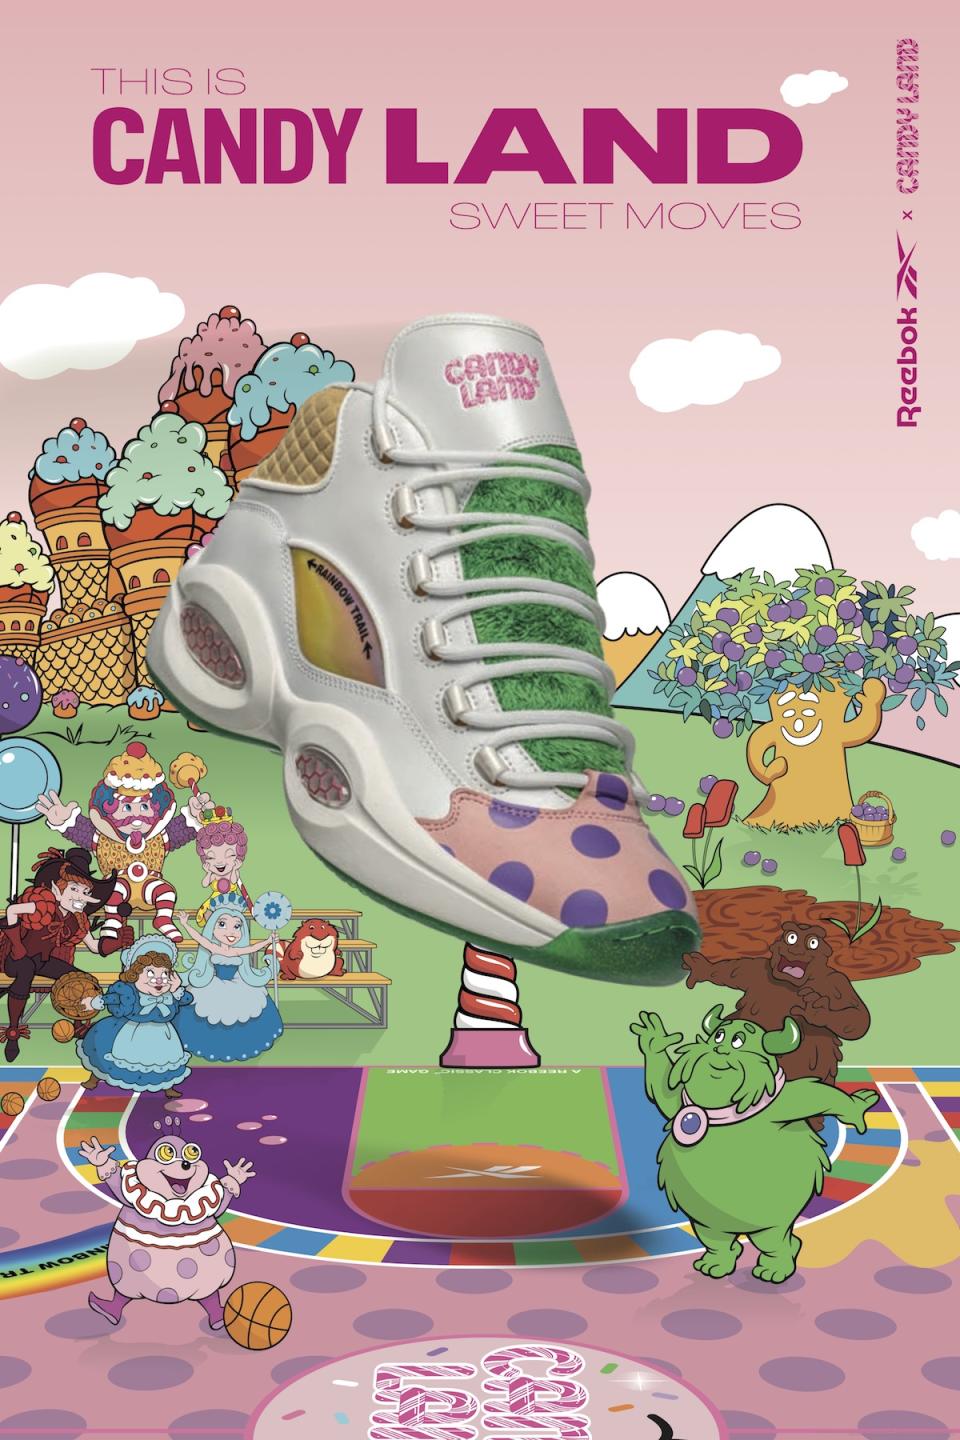 Reebok's Sweet Moves Candy Land sneakers